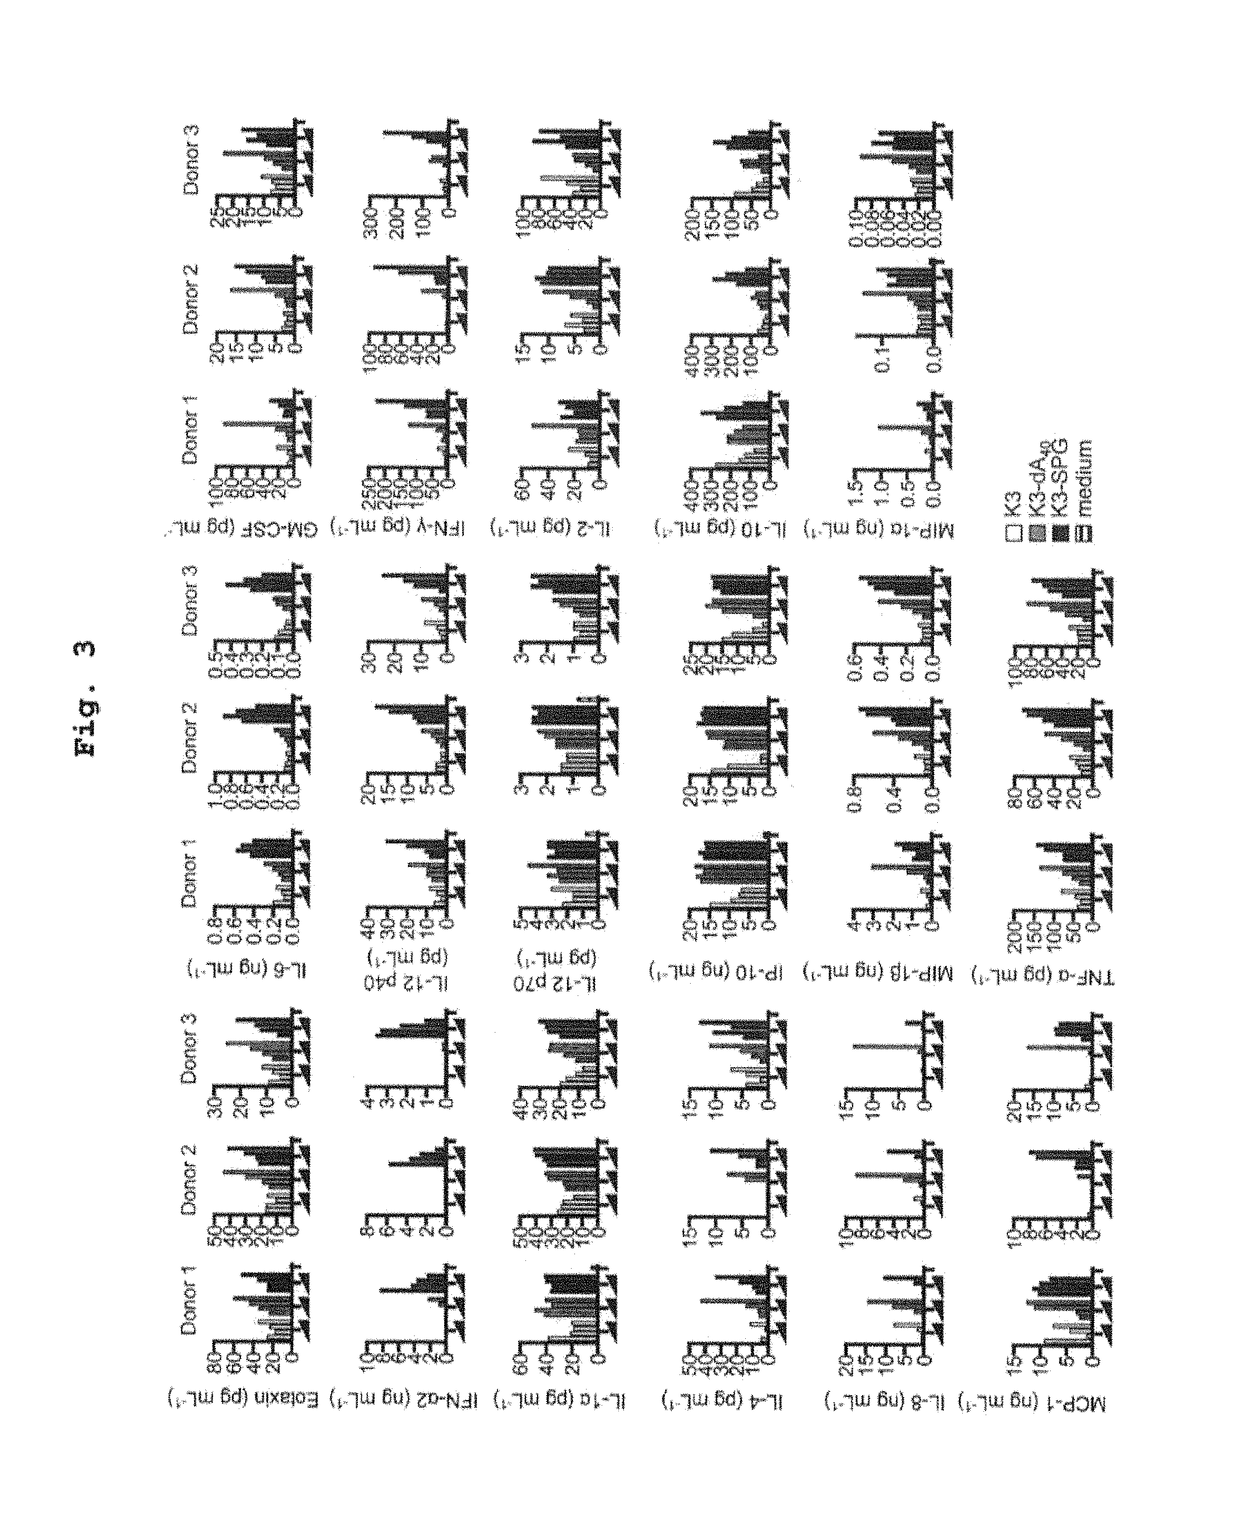 Complex containing oligonucleotide having immunopotentiating activity and use thereof